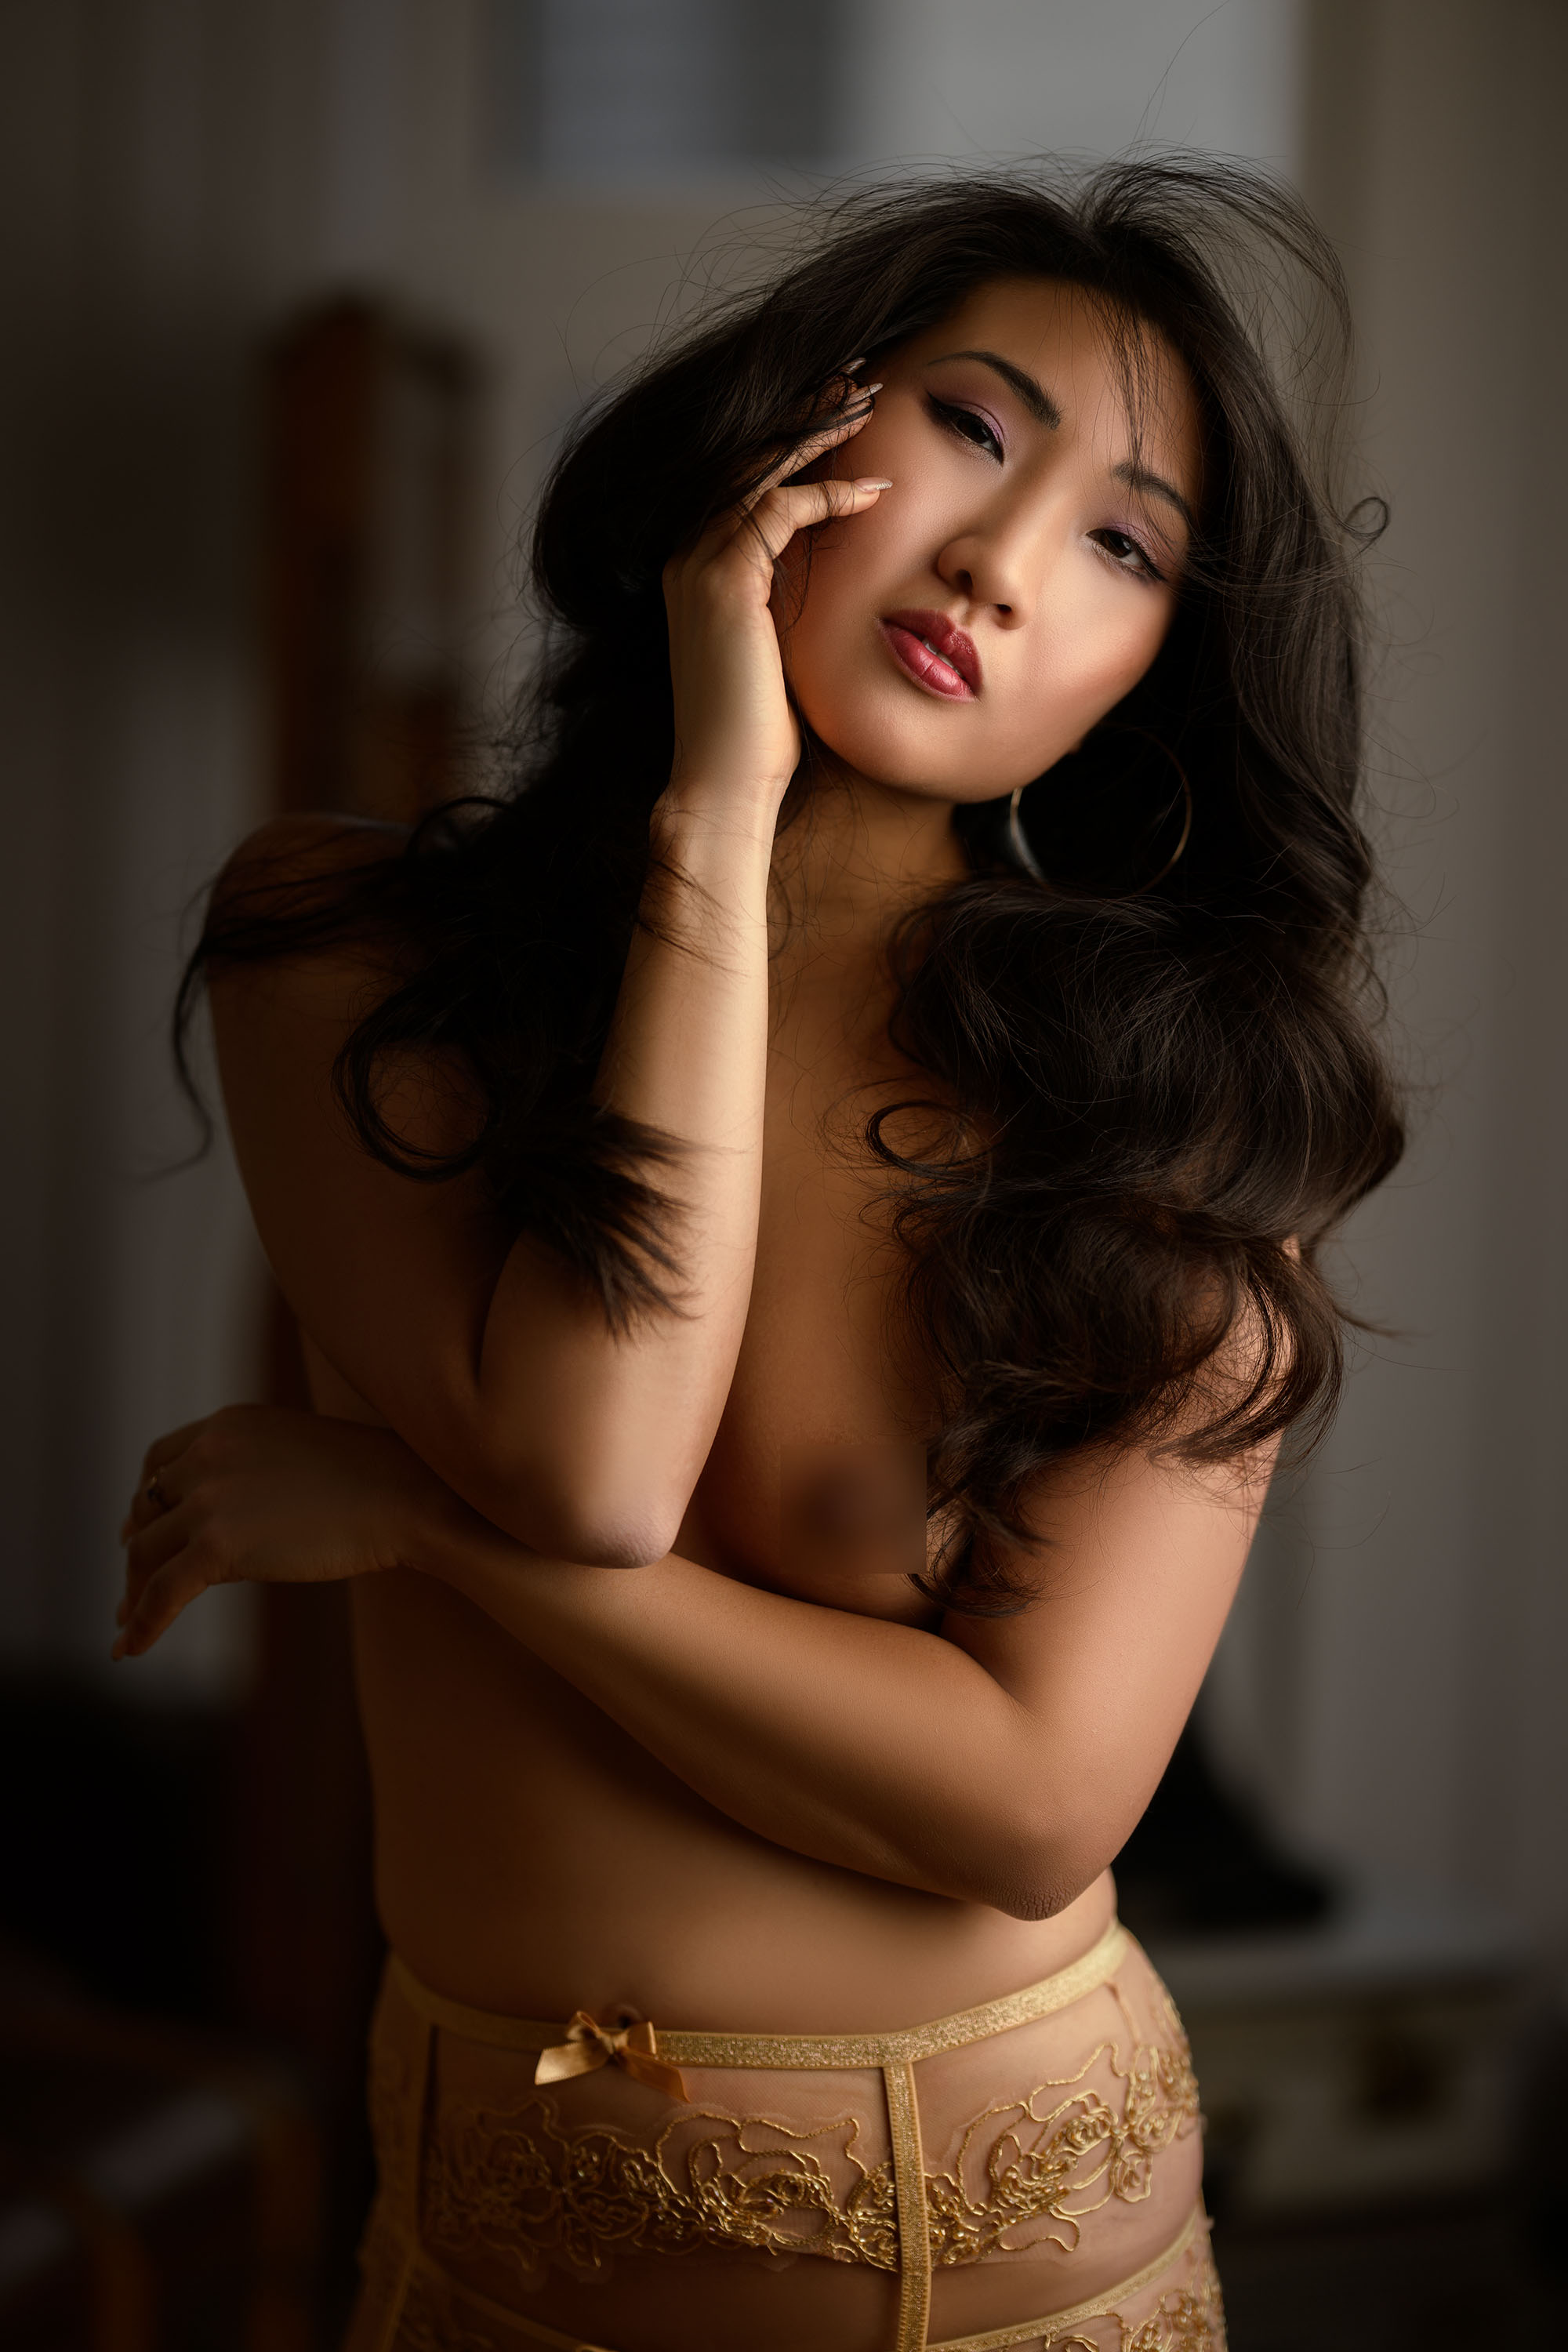 Minh-Ly, model from Belgium at a boudoir photoshoot